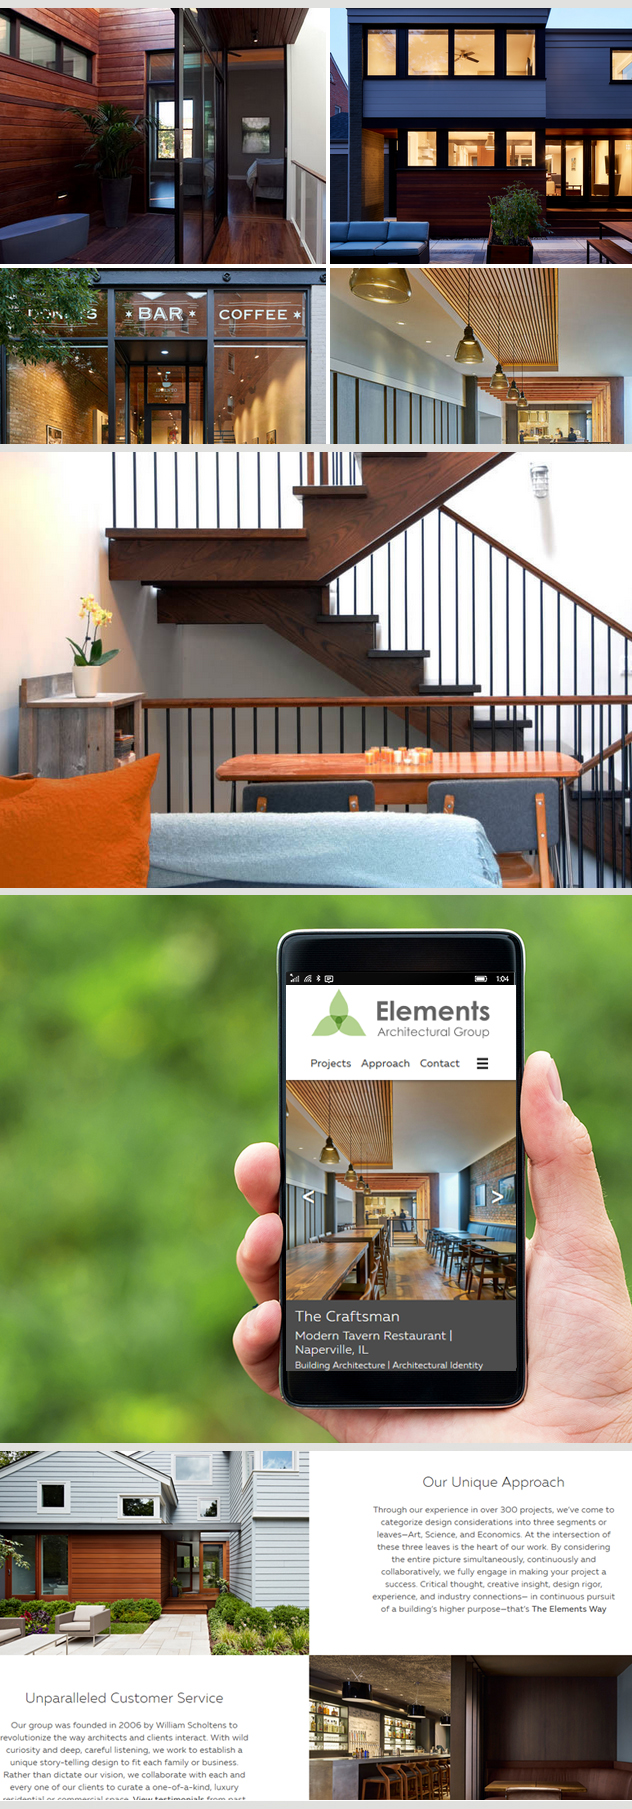 Milwaukee web marketing for Elements Architectural Group